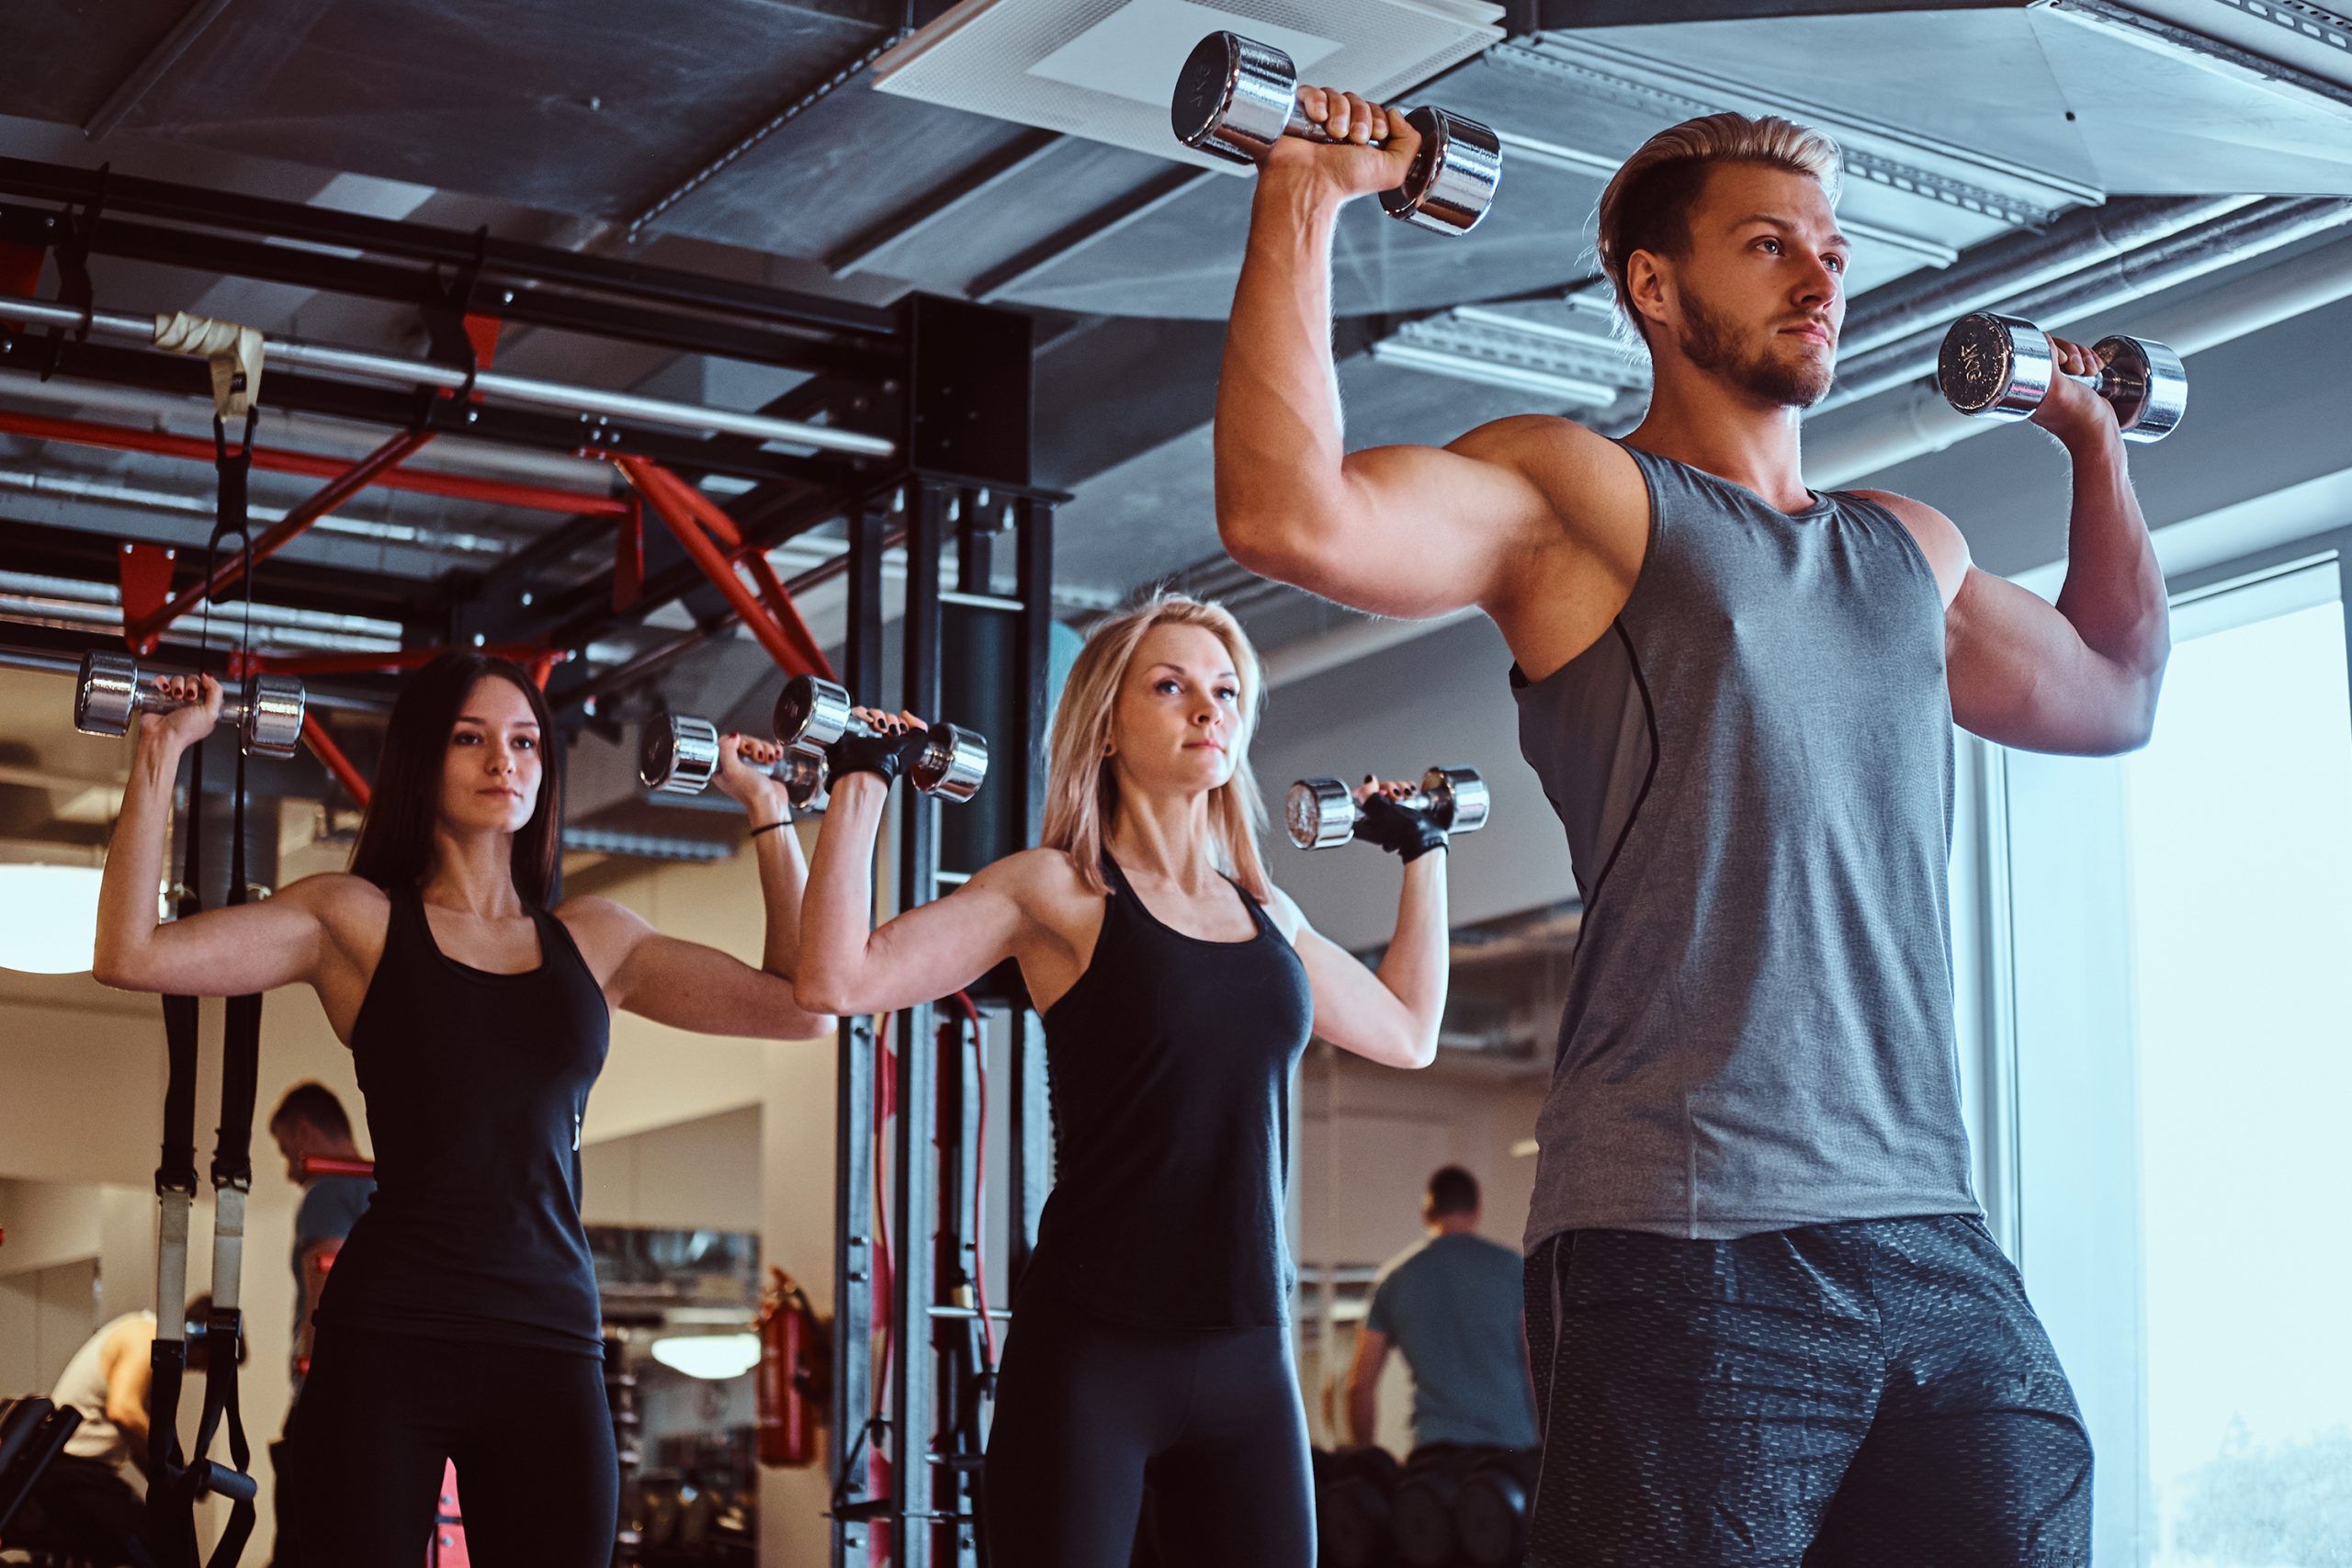 Group of people exercising with dumbbells in the fitness club or gym.